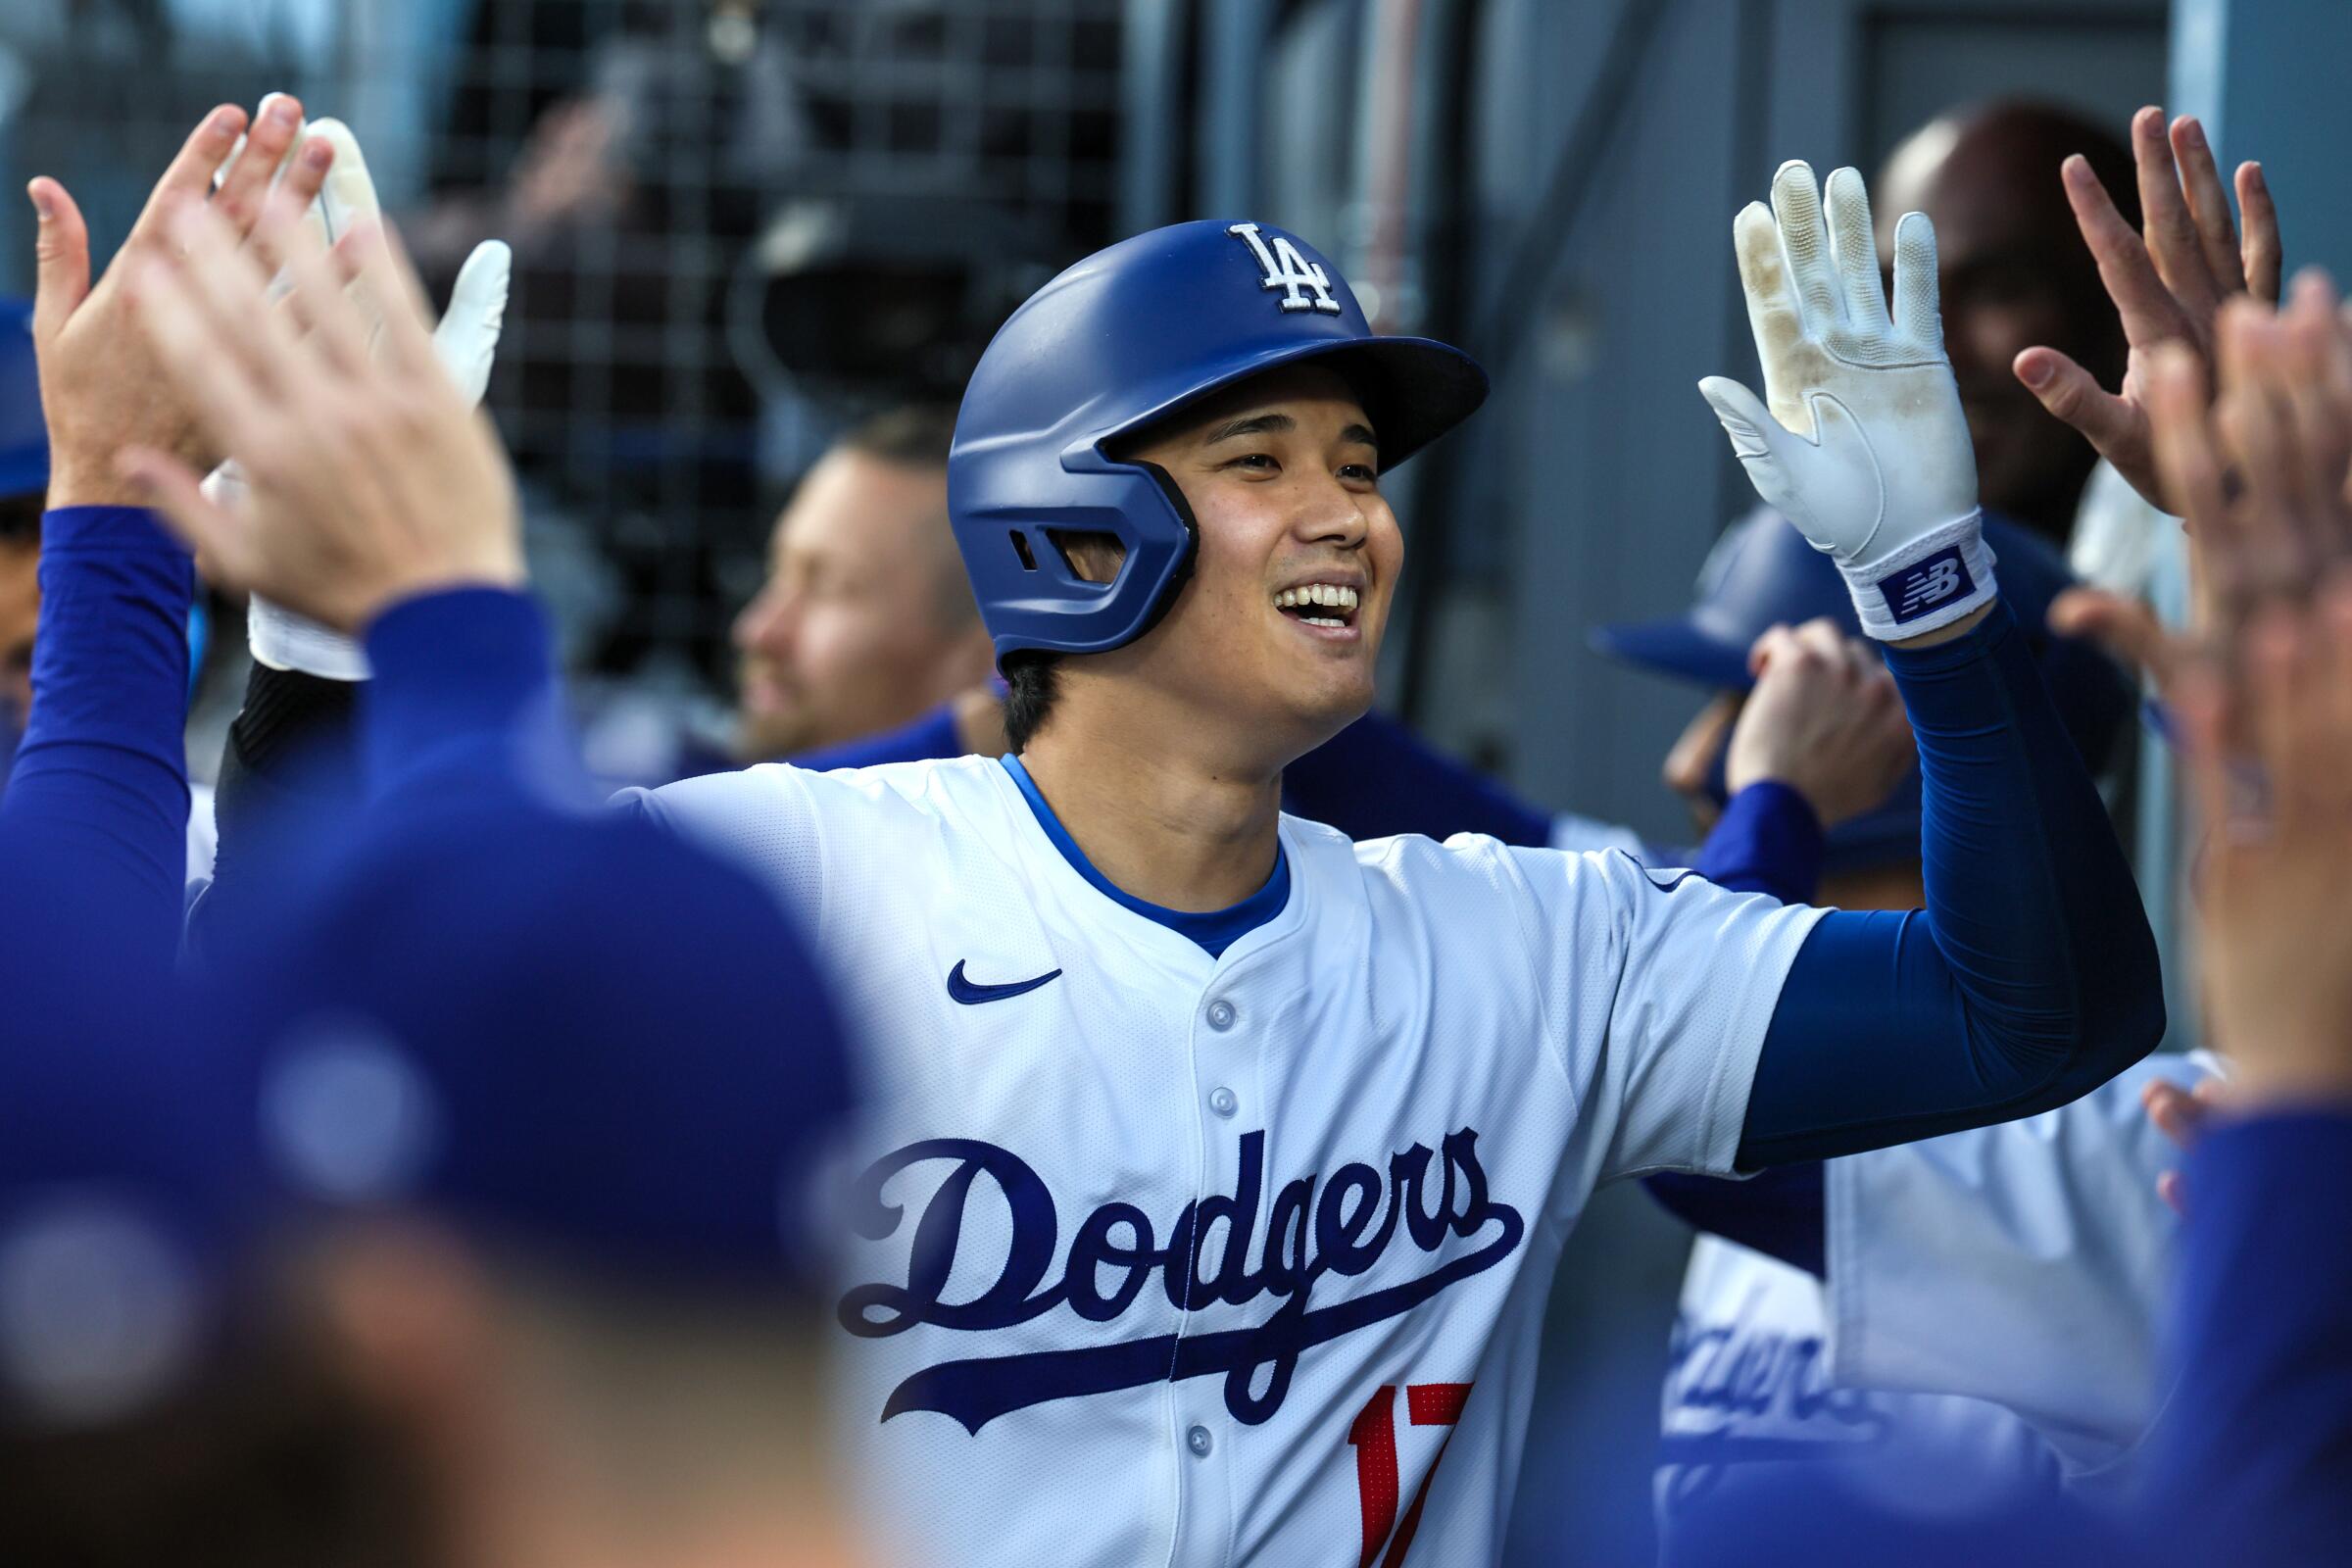 Dodgers designated hitter Shohei Ohtani celebrates in the dugout after hitting a two-run home run against the Miami Marlins.